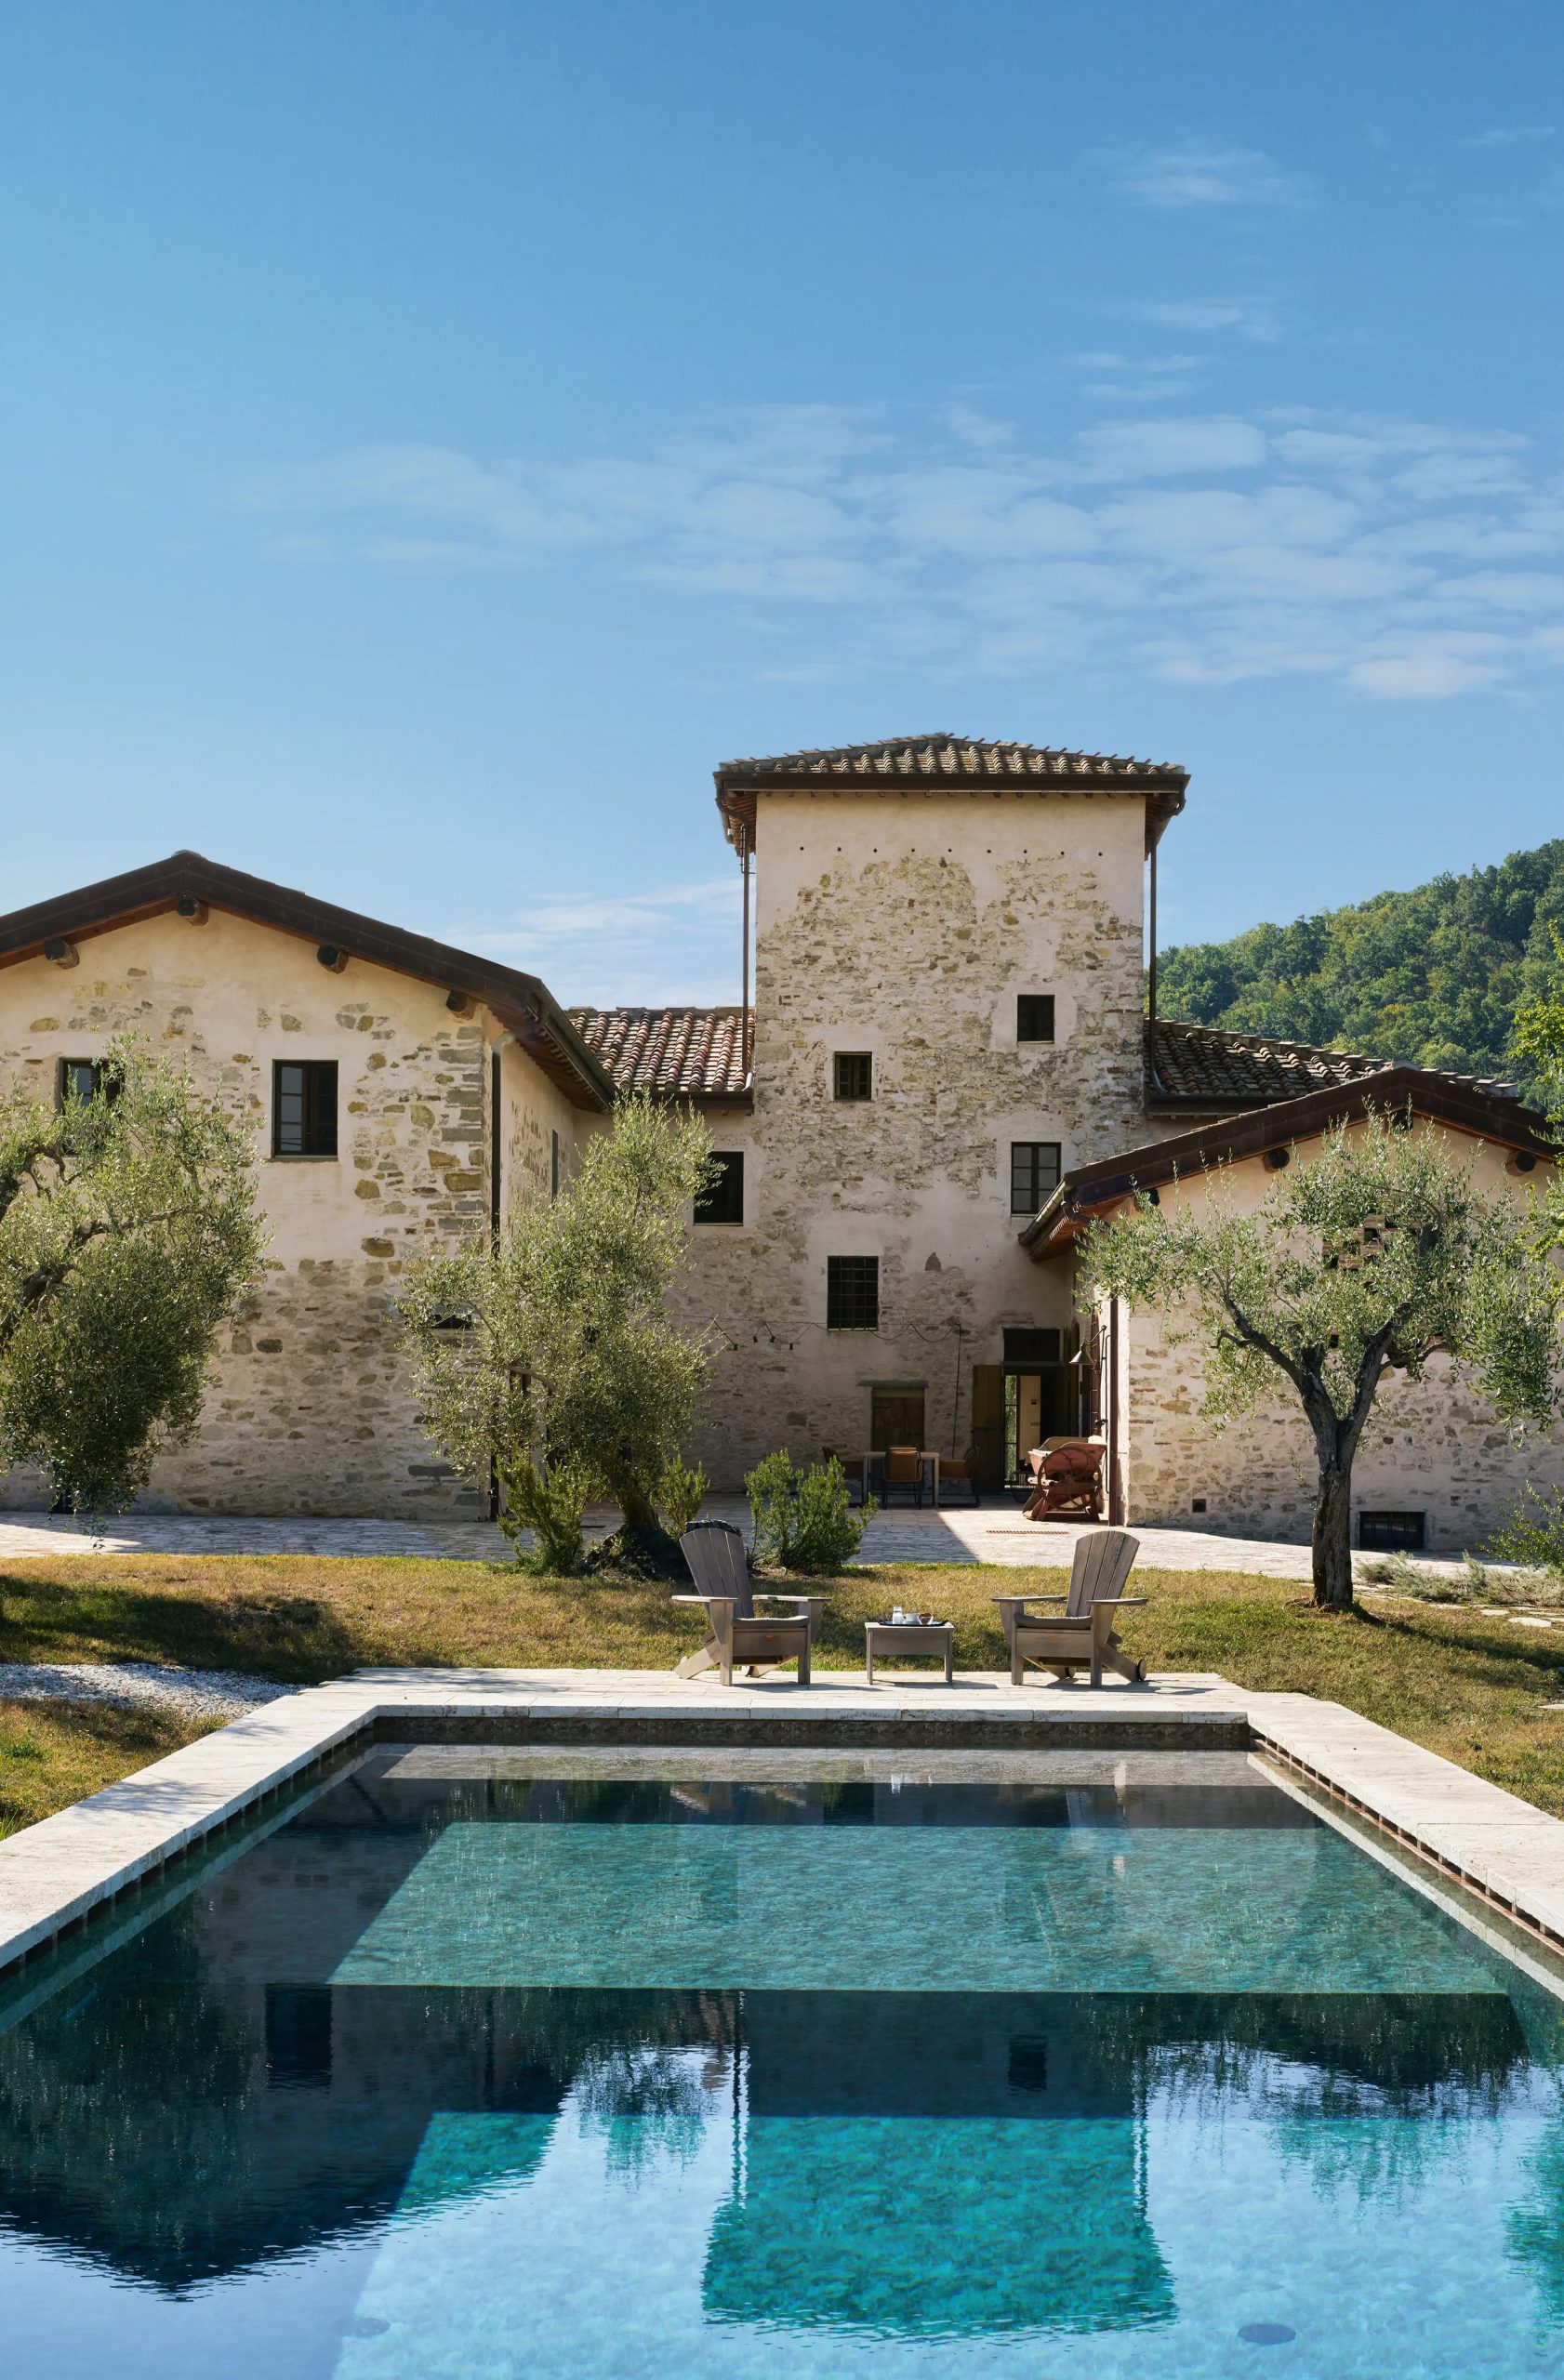 Tuscan stone house with pool